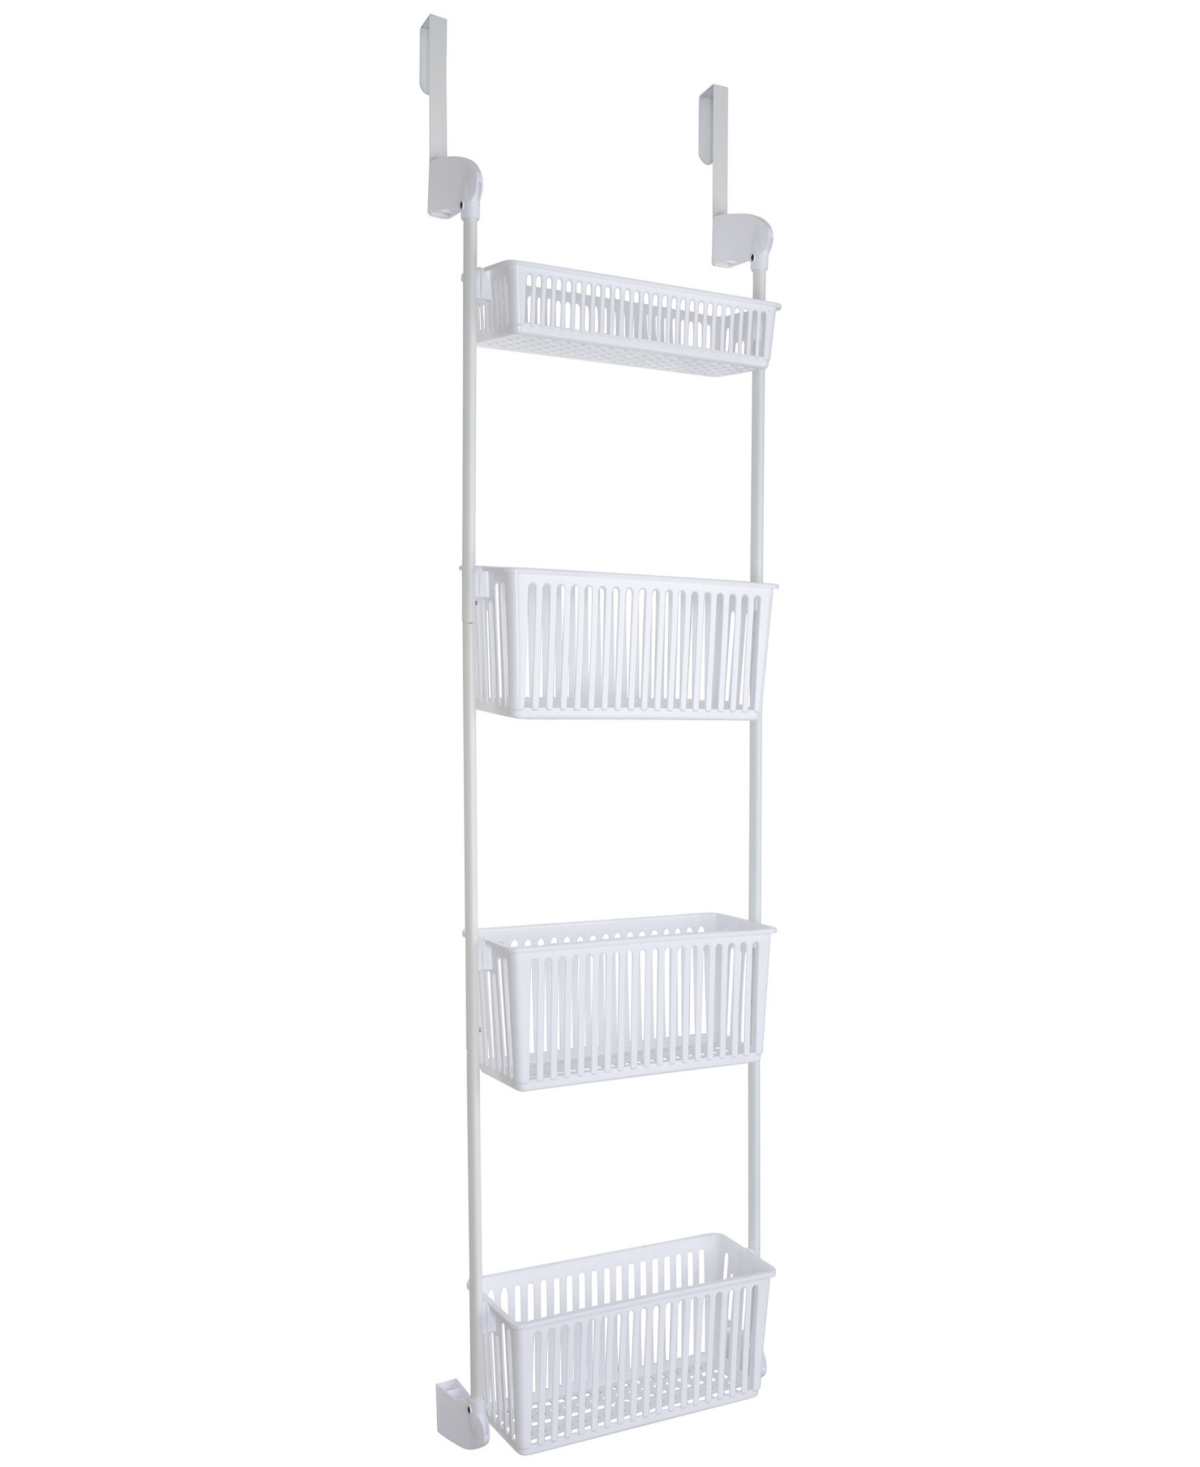 4-Tier Over-the-Door Hanging Pantry Organizer with Deep Baskets - White